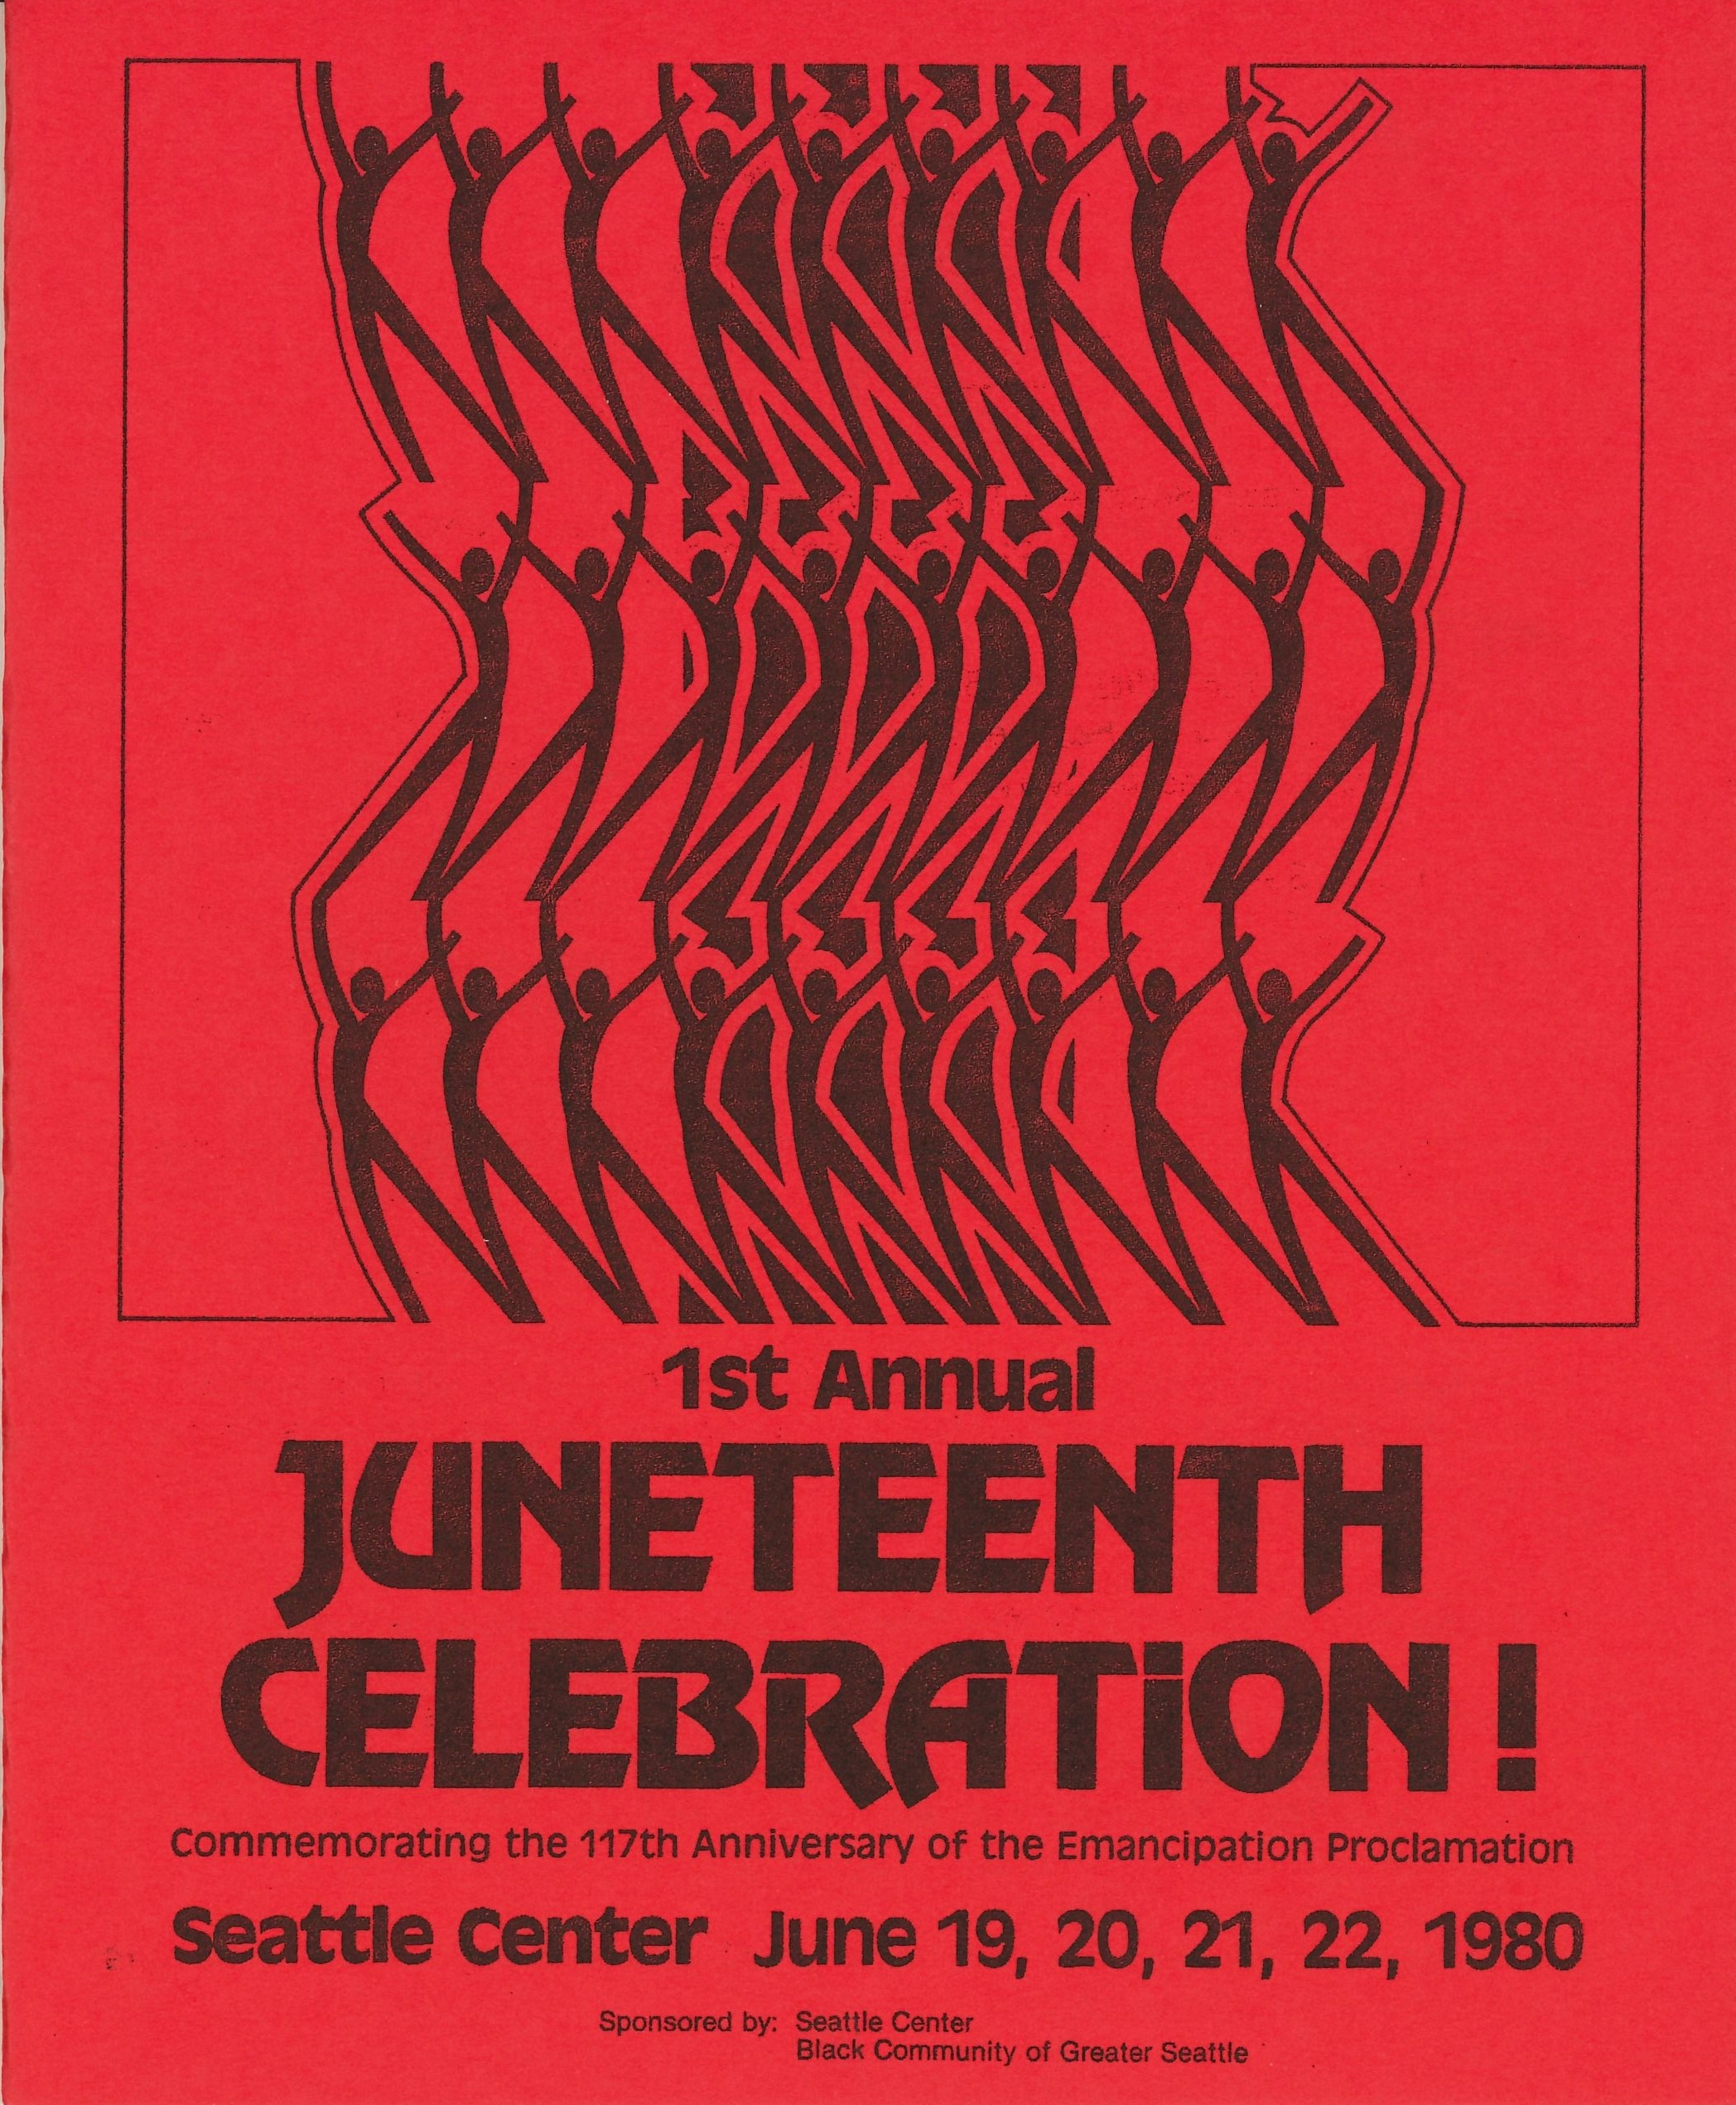 Juneteenth celebrations, like this 1980 event in Seattle, are sacred spaces and should be honored accordingly.